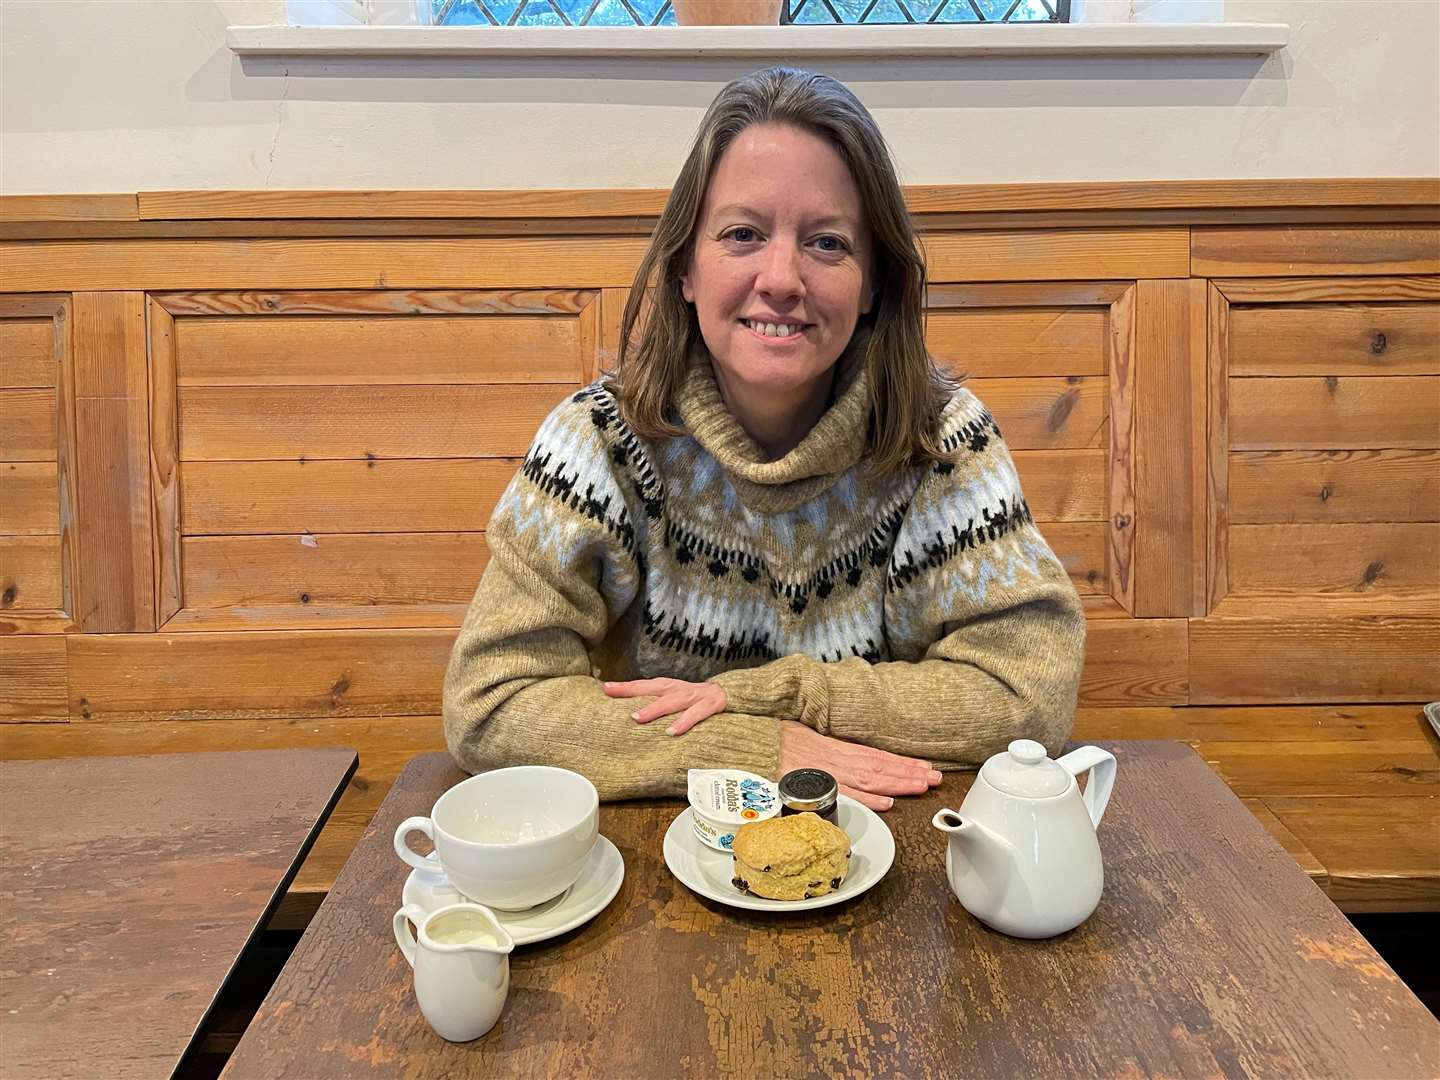 Sarah Merker completed a decade-long project to sample a scone at every possible National Trust location earlier this year (Sarah Merker/PA)